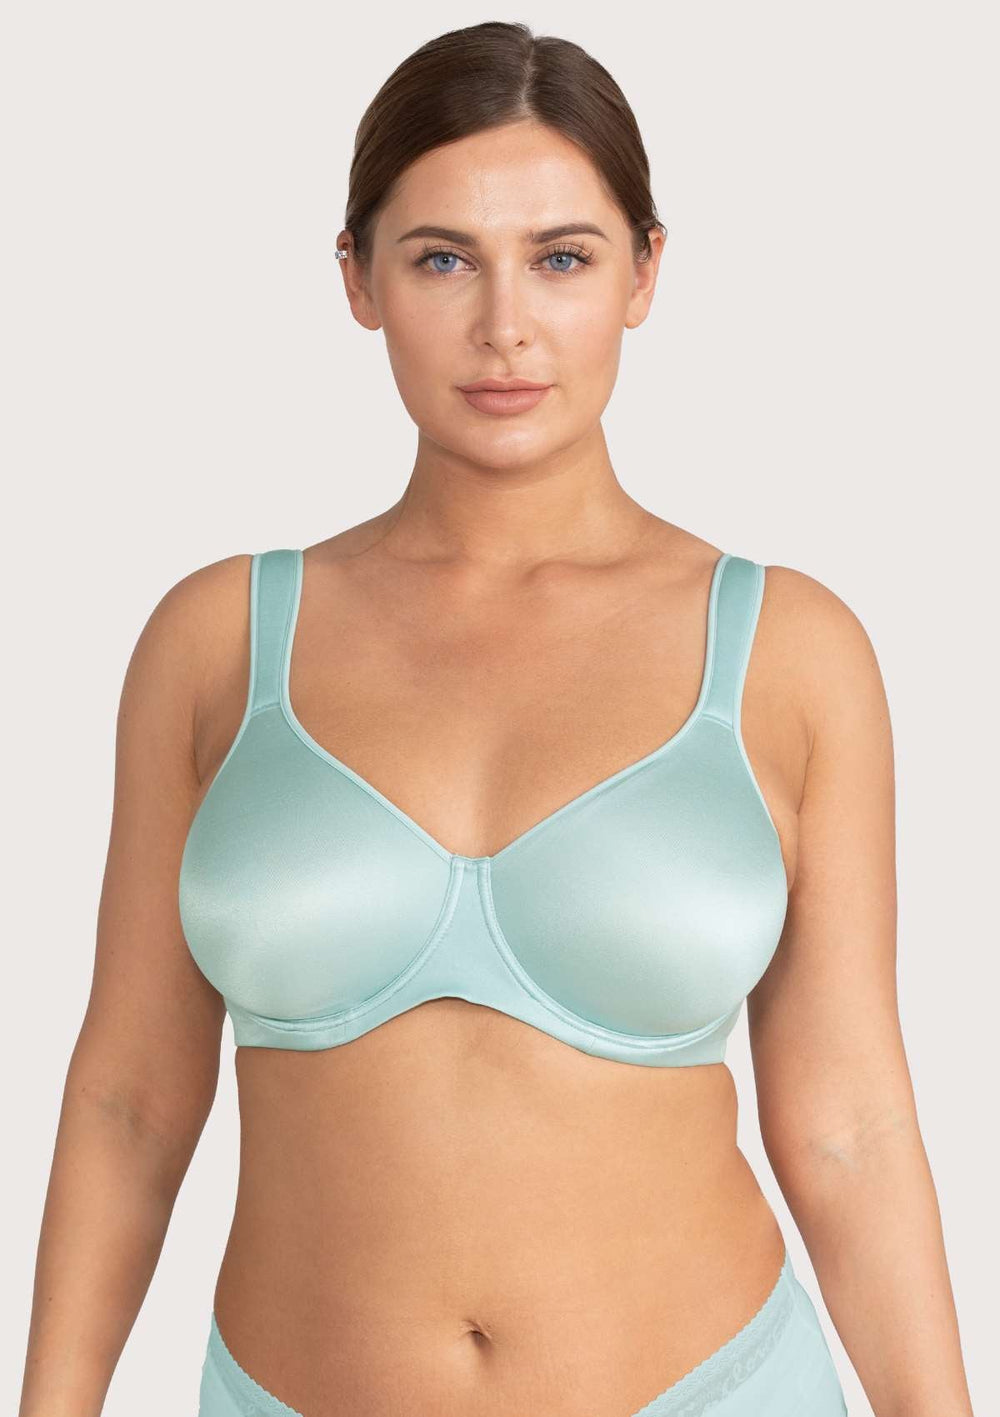 HSIA Strapless Bras for Women, Plus Size Minimizer Bra with - Import It All